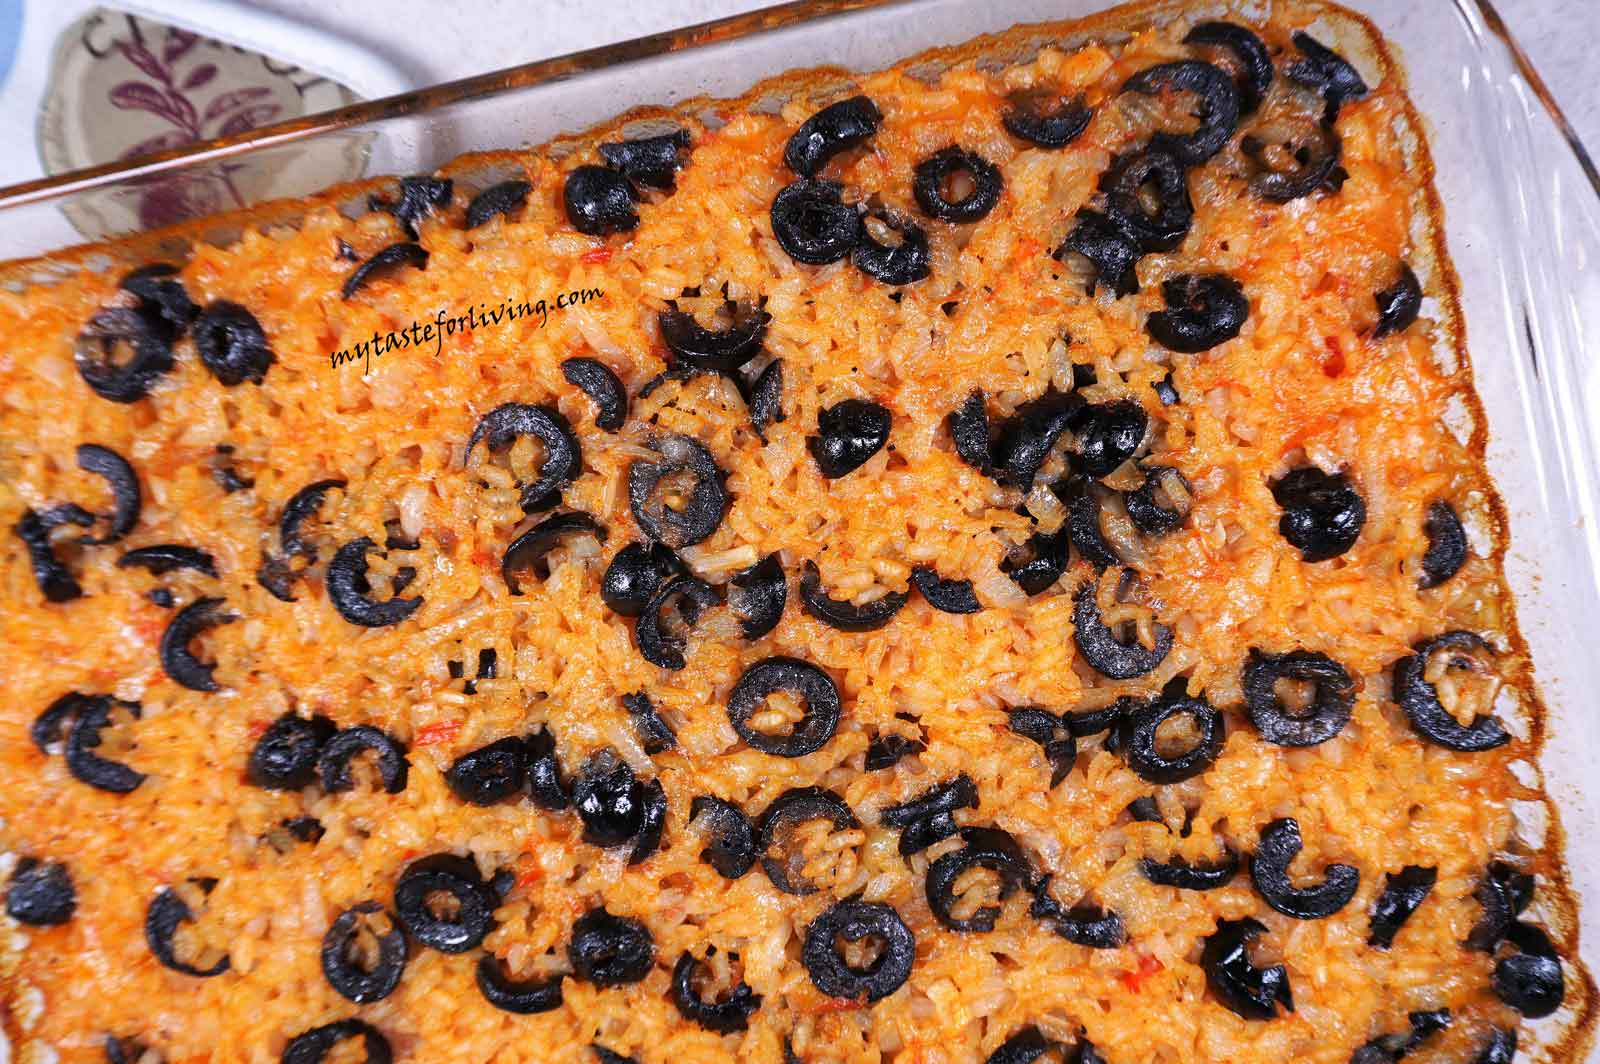 Vegan, fast and tasty! Baked rice with tomatoes and olives. You can use canned tomatoes or grate fresh tomatoes. For me personally, it tastes better when you use more onion, so I recommend not saving it. And you can add the olives whole, but I advise you to cut them into thin strips.